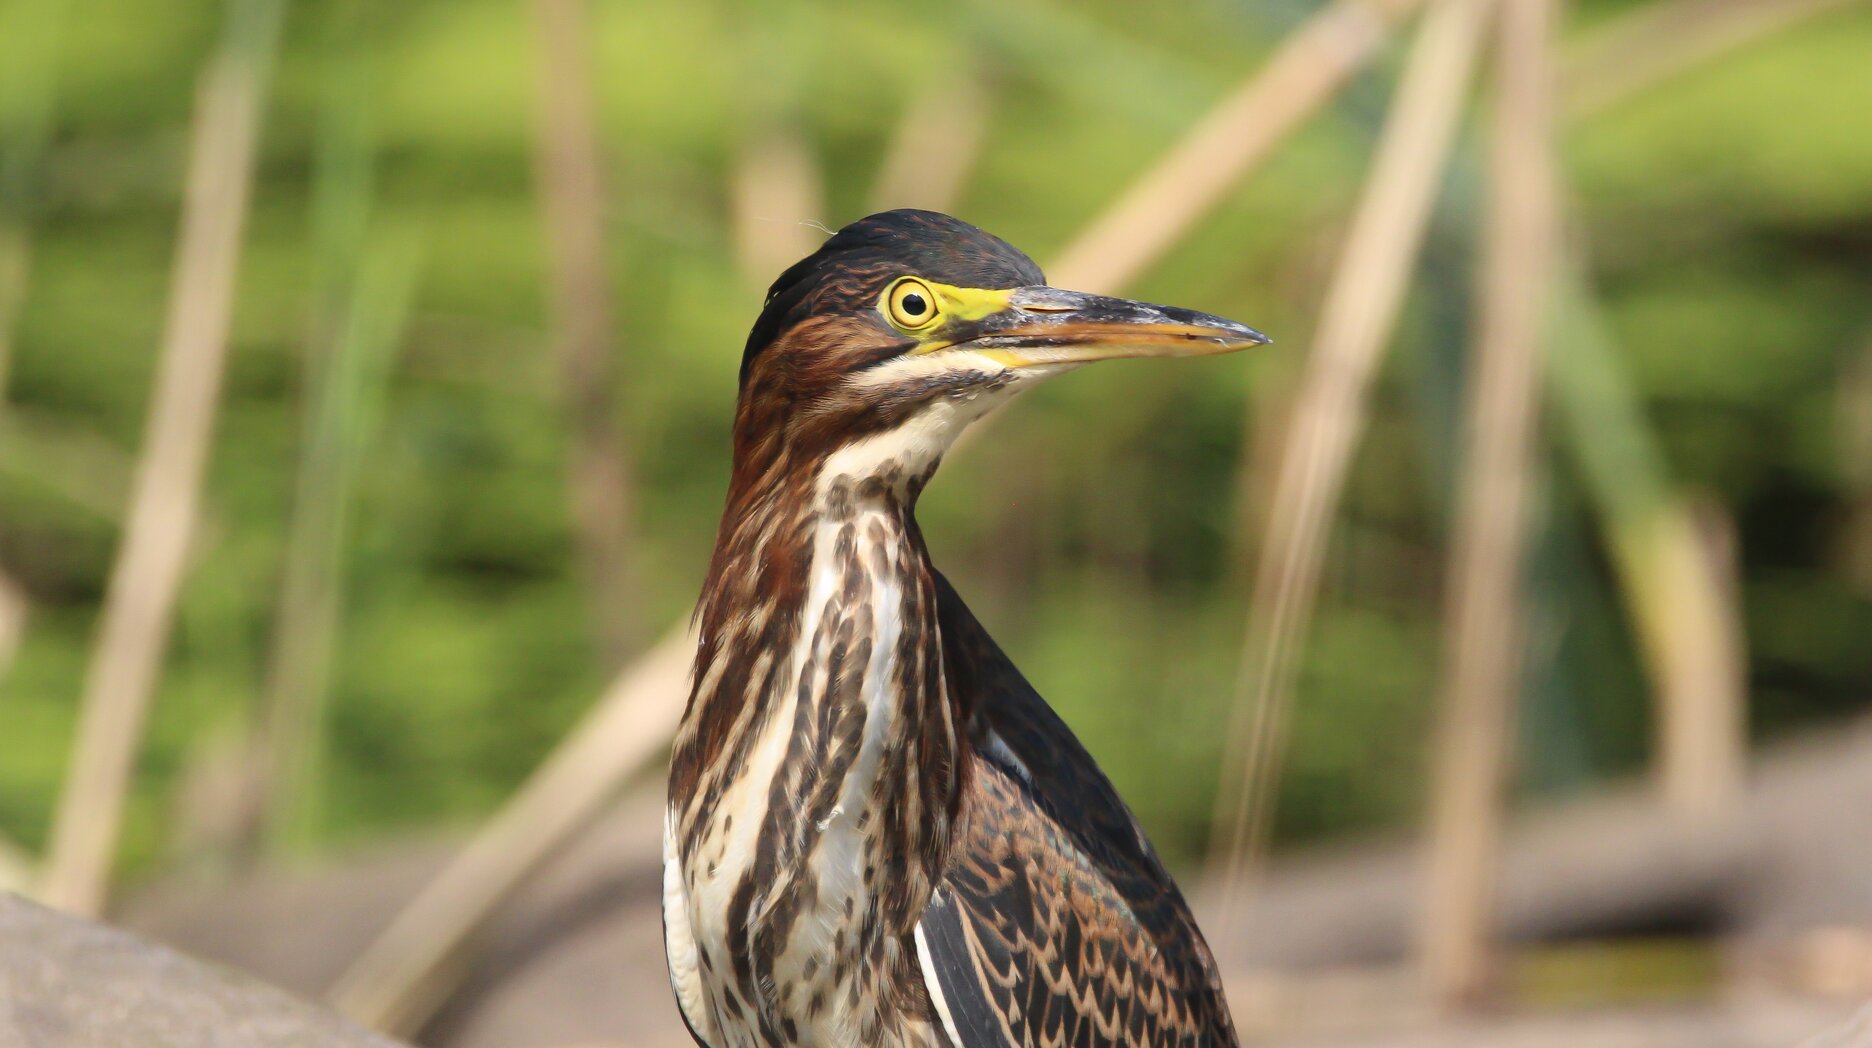 Green Herons come to feed in the Snug Harbor wetlands. Photo: <a href="https://www.flickr.com/photos/89780664@N05/" target="_blank">Dave Ostapiuk</a>